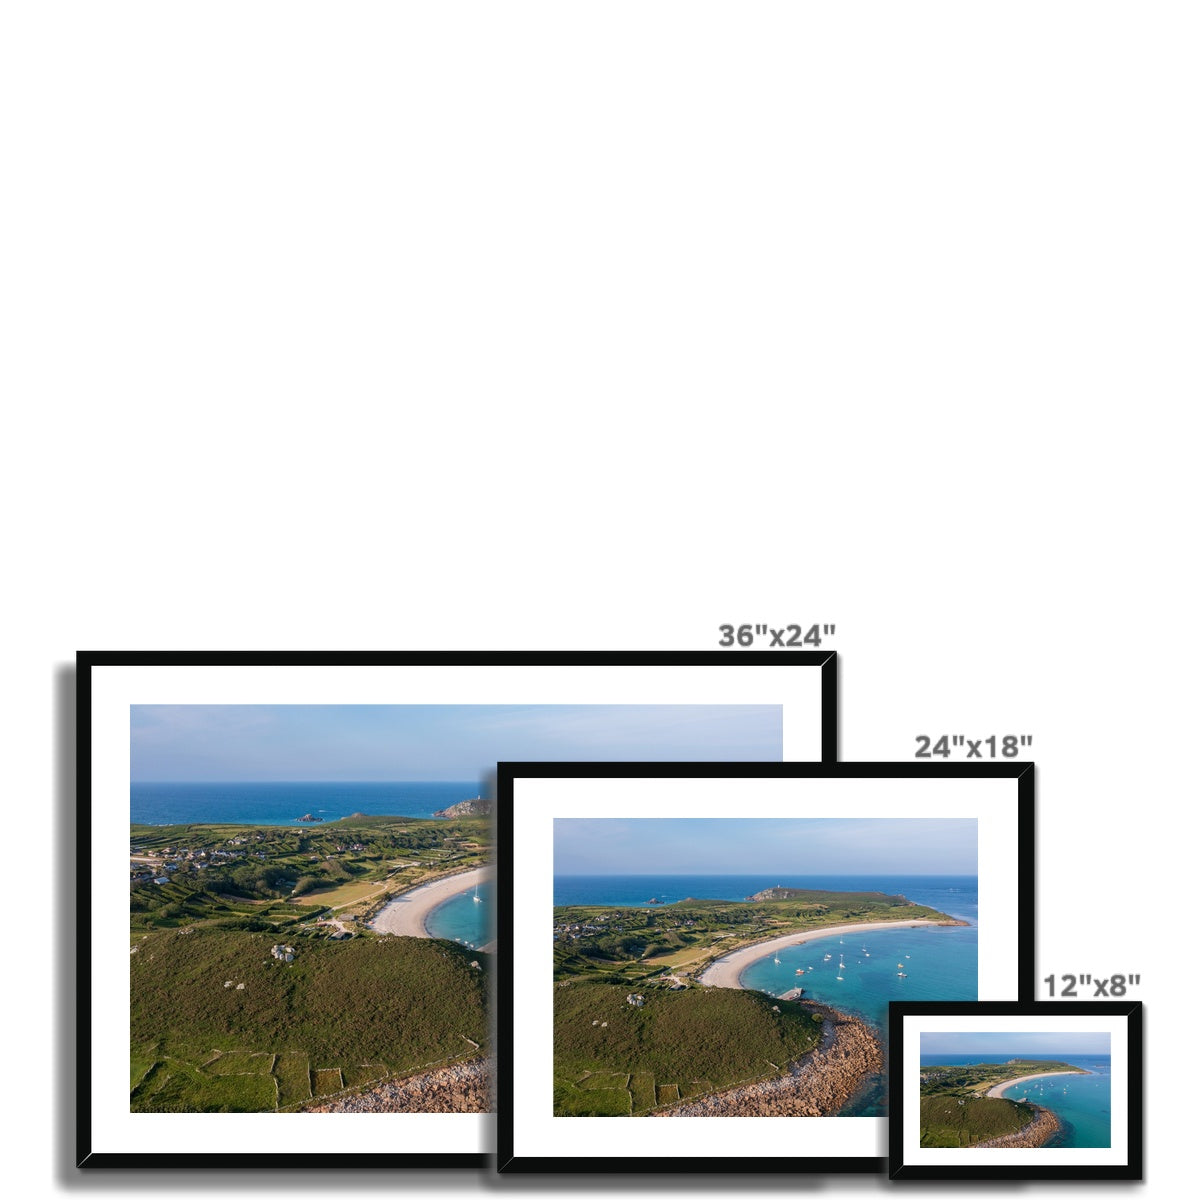 cruthers hill st martins frame sizes